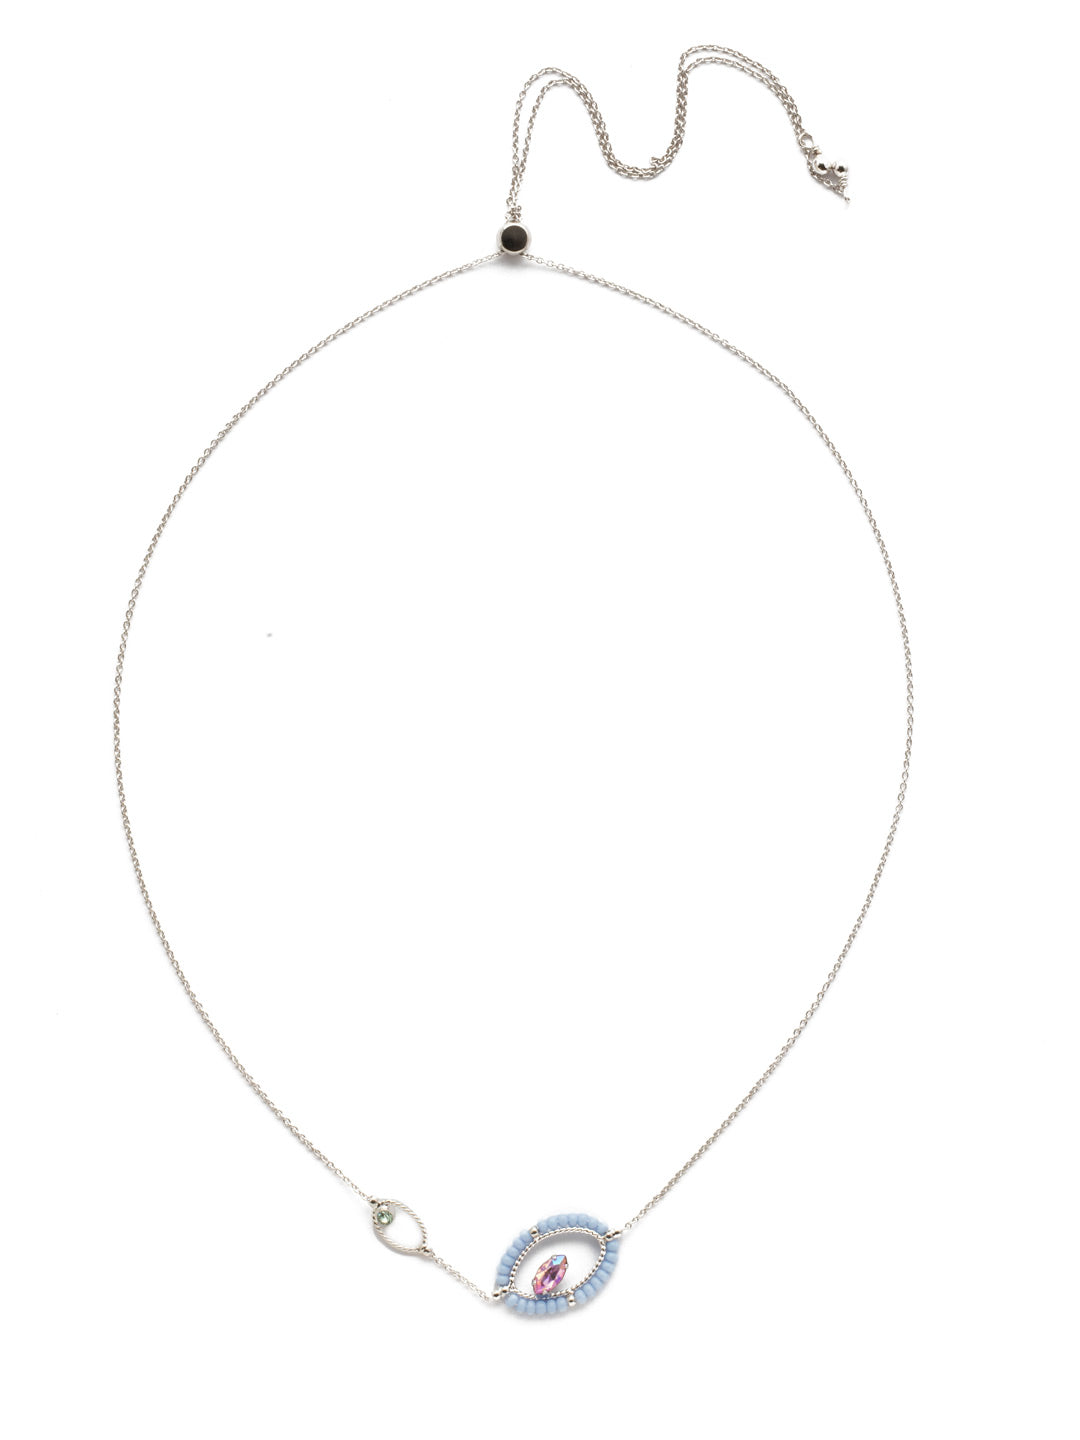 Eye of the Beholder Pendant Necklace - NEK34RHSSU - <p>Airy and sophisticated, stand out with this navette crystal at the center of attention in this pendant necklace beauty. From Sorrelli's Seersucker collection in our Palladium Silver-tone finish.</p>